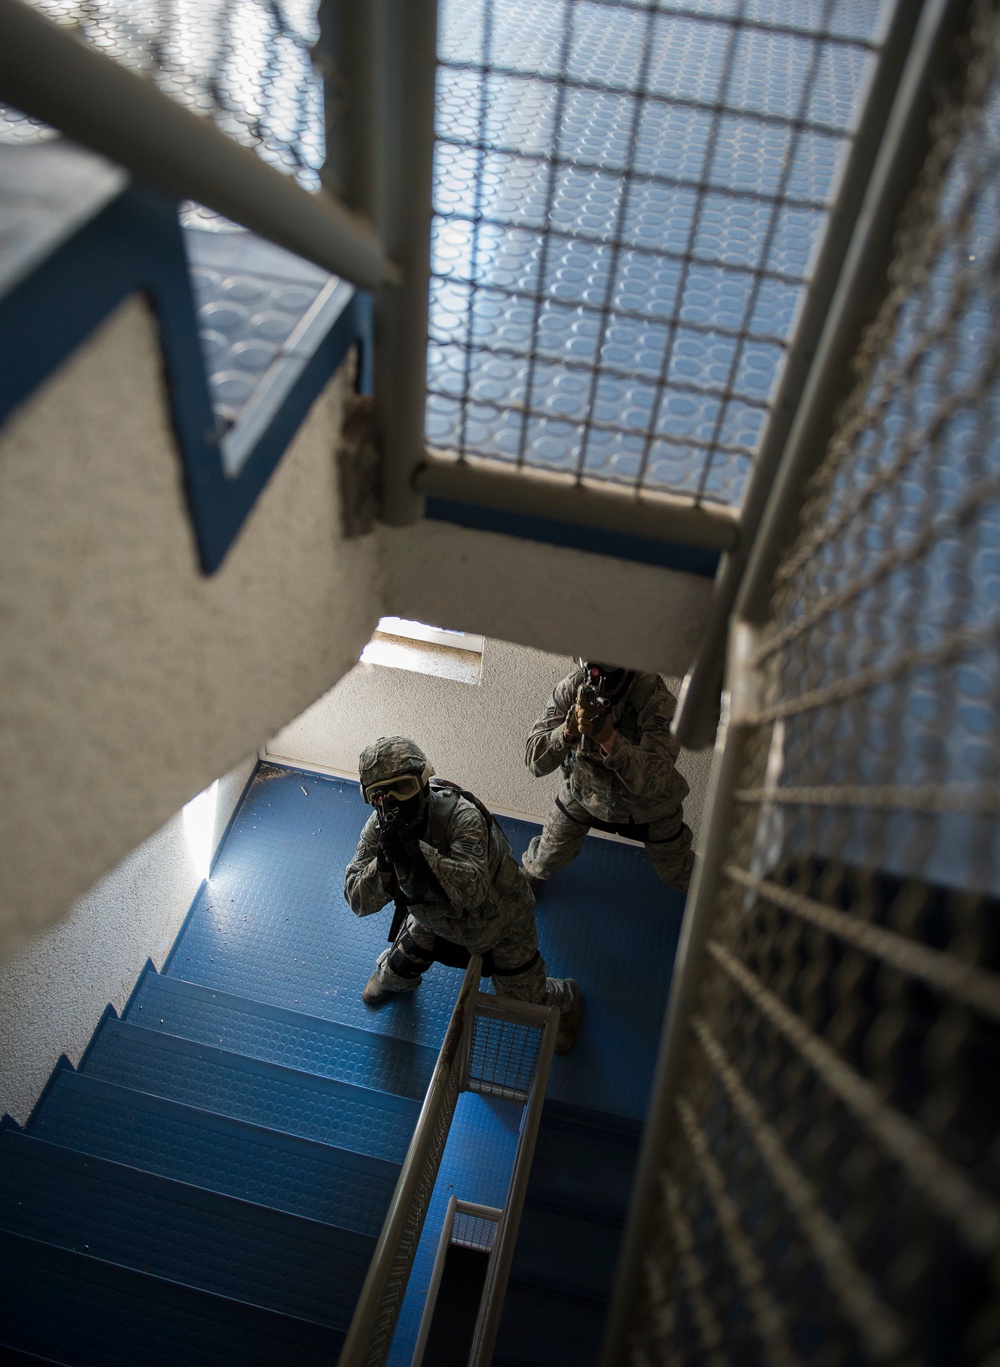 569th SFS active shooter training